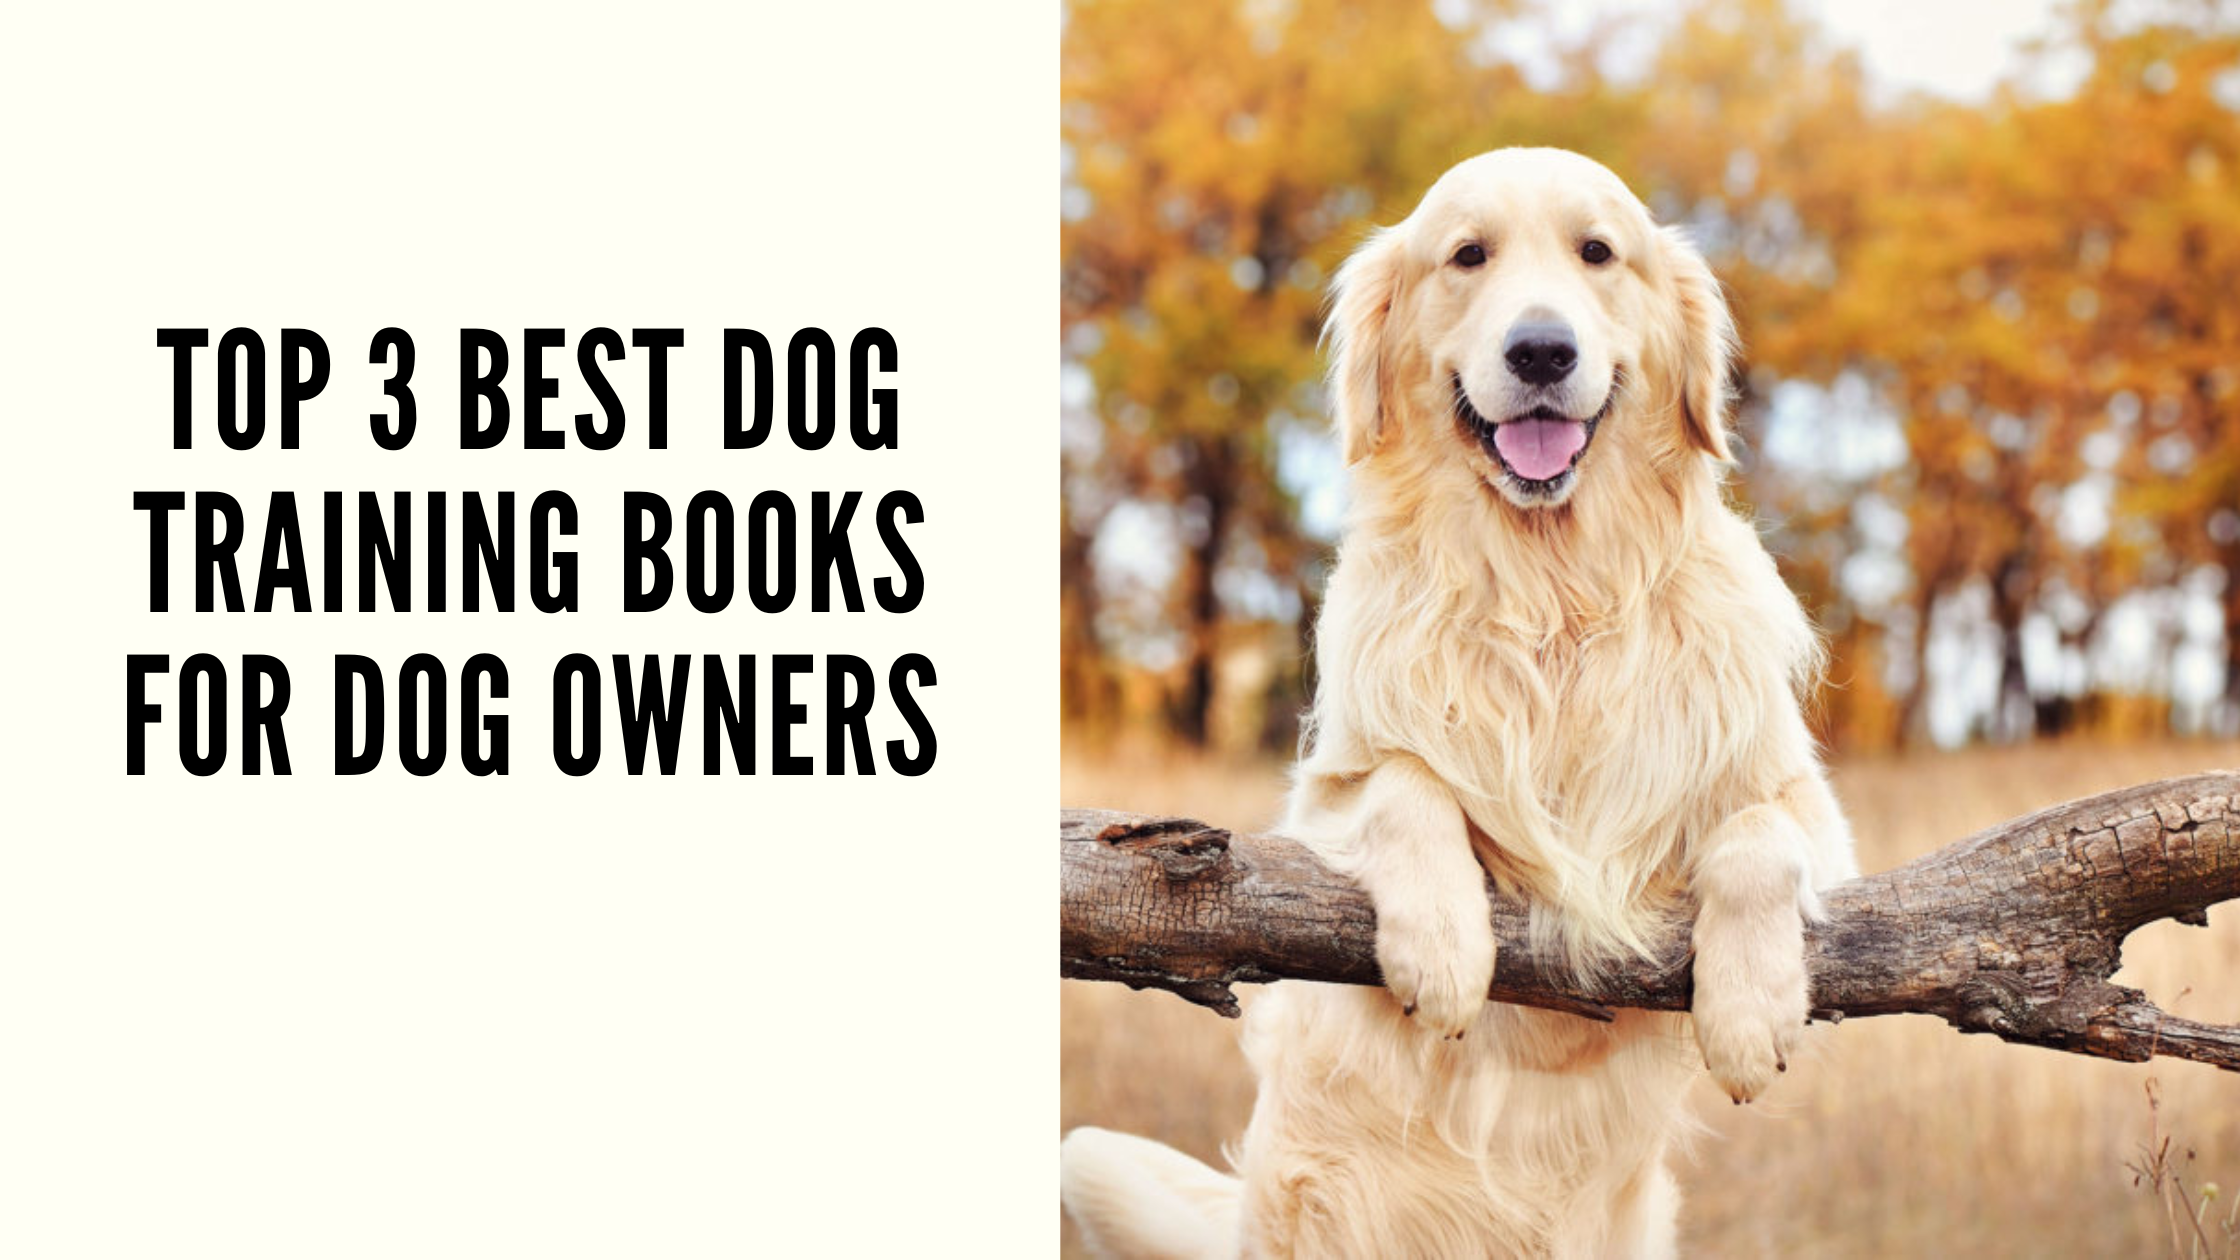 Top 3 Best Dog Training Books for Dog Owners